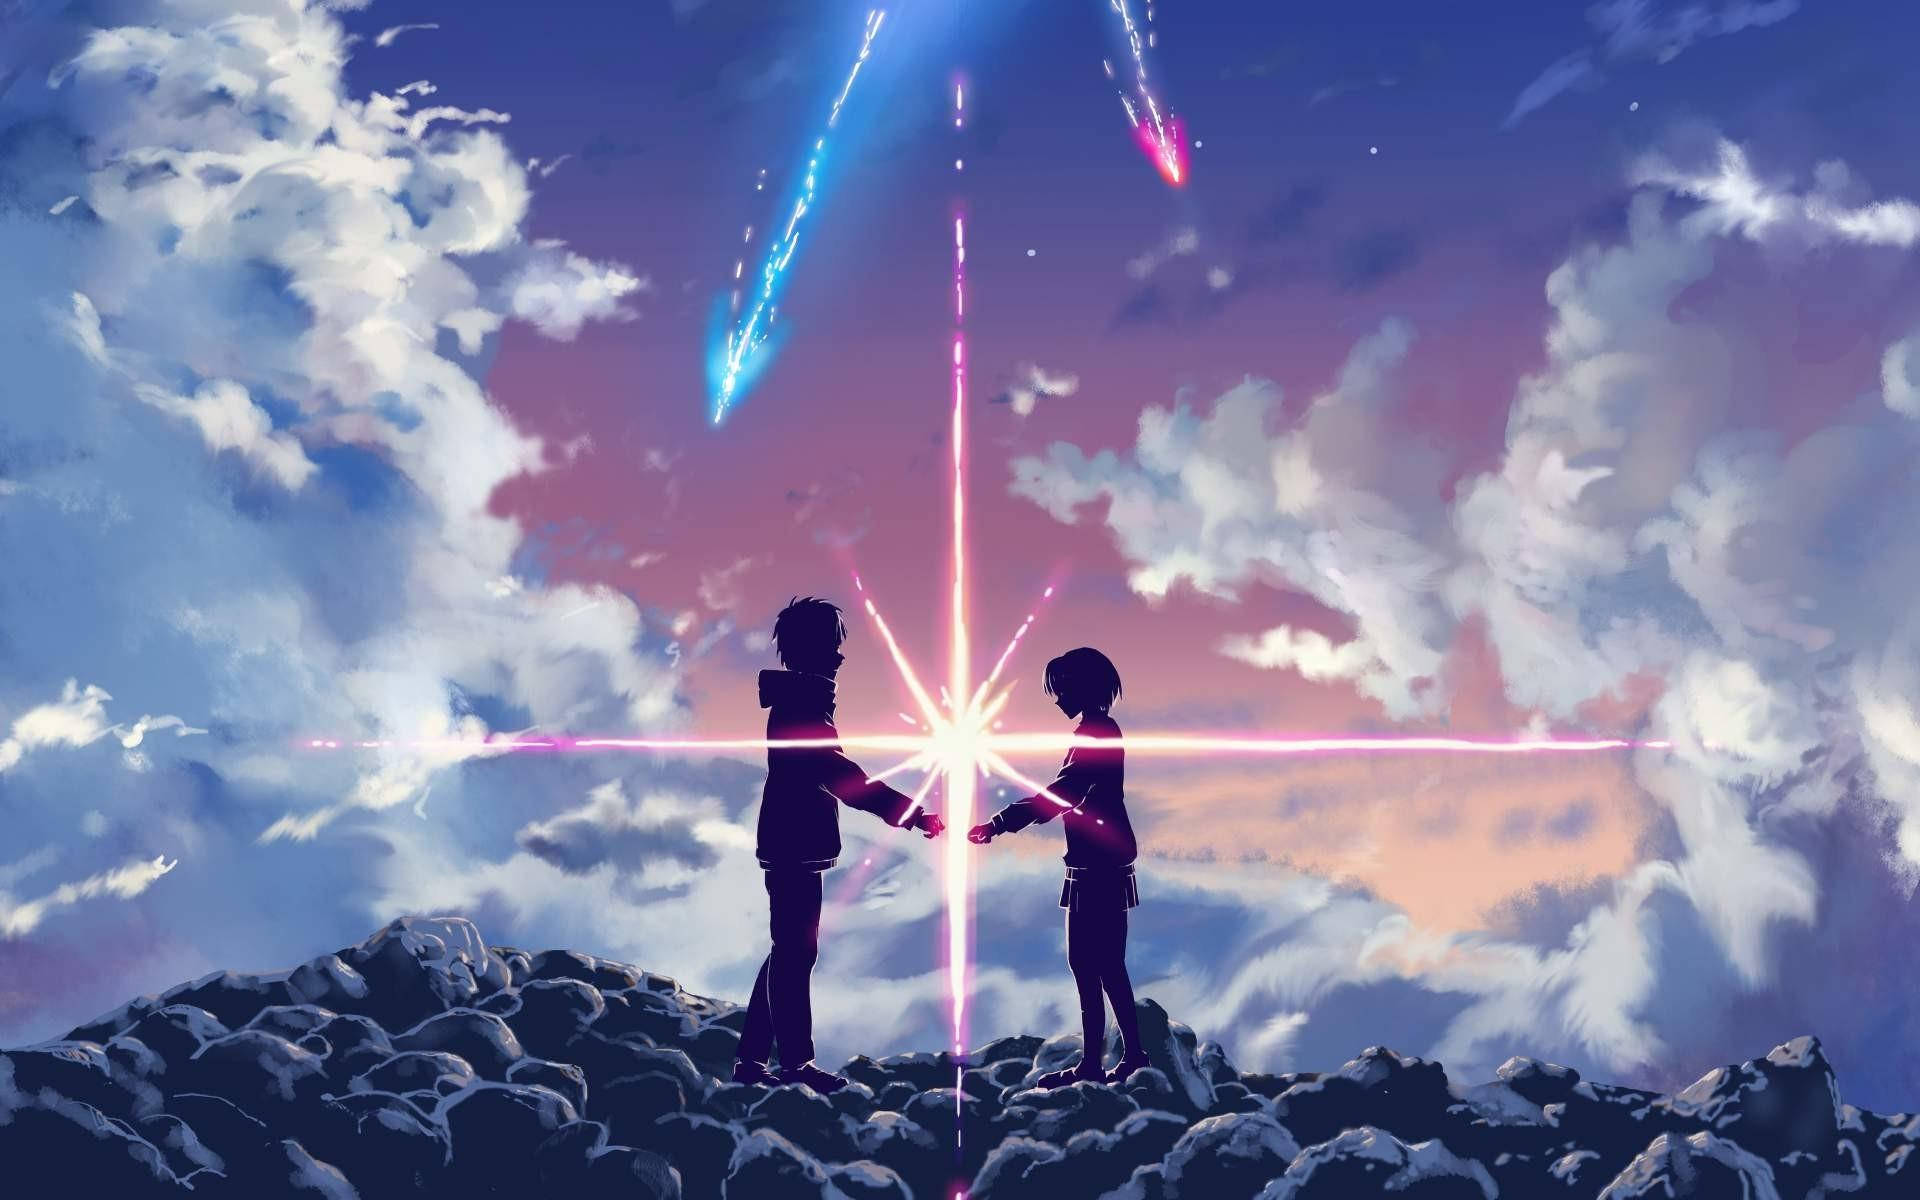 Your Name Aesthetic Anime Couple Background